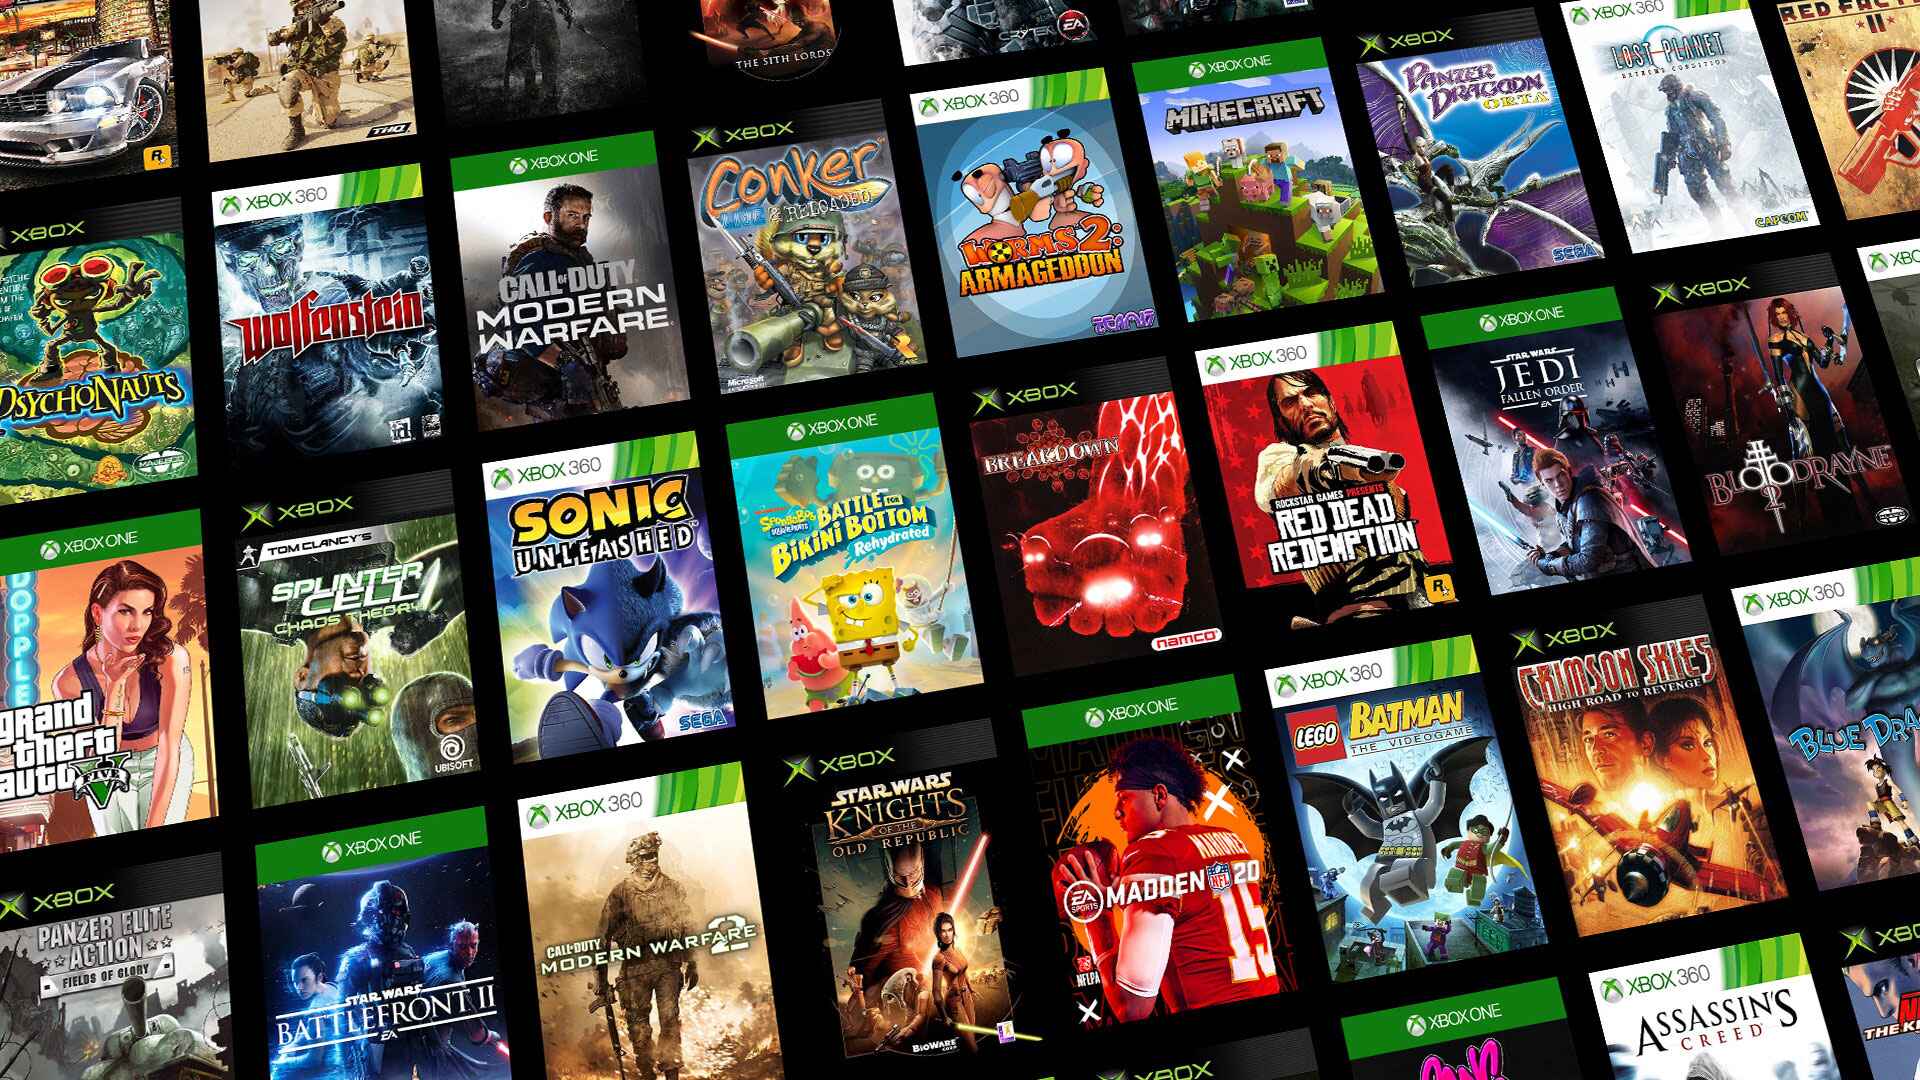 HOW TO DOWNLOAD NEW FREE GAMES FOR XBOX 360 IN 2022 #Technology #xbox # xbox360 #gamesparaxbox 